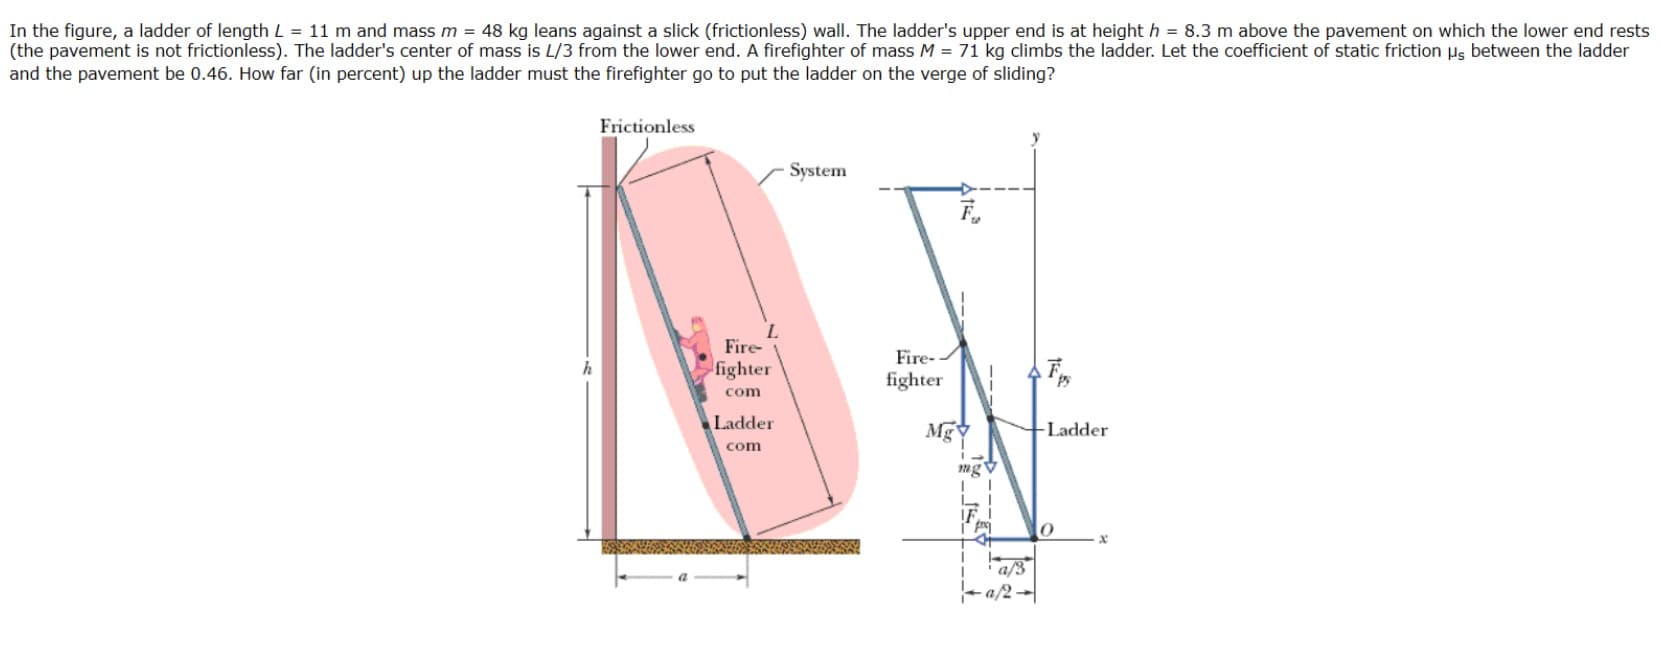 In the figure, a ladder of length L = 11 m and mass m = 48 kg leans against a slick (frictionless) wall. The ladder's upper end is at height h = 8.3 m above the pavement on which the lower end rests
(the pavement is not frictionless). The ladder's center of mass is L/3 from the lower end. A firefighter of mass M = 71 kg climbs the ladder. Let the coefficient of static friction us between the ladder
and the pavement be 0.46. How far (in percent) up the ladder must the firefighter go to put the ladder on the verge of sliding?
Frictionless
System
Fire-
Fire-/
fighter
fighter
com
Ladder
Ladder
com
a/3
a/2-
